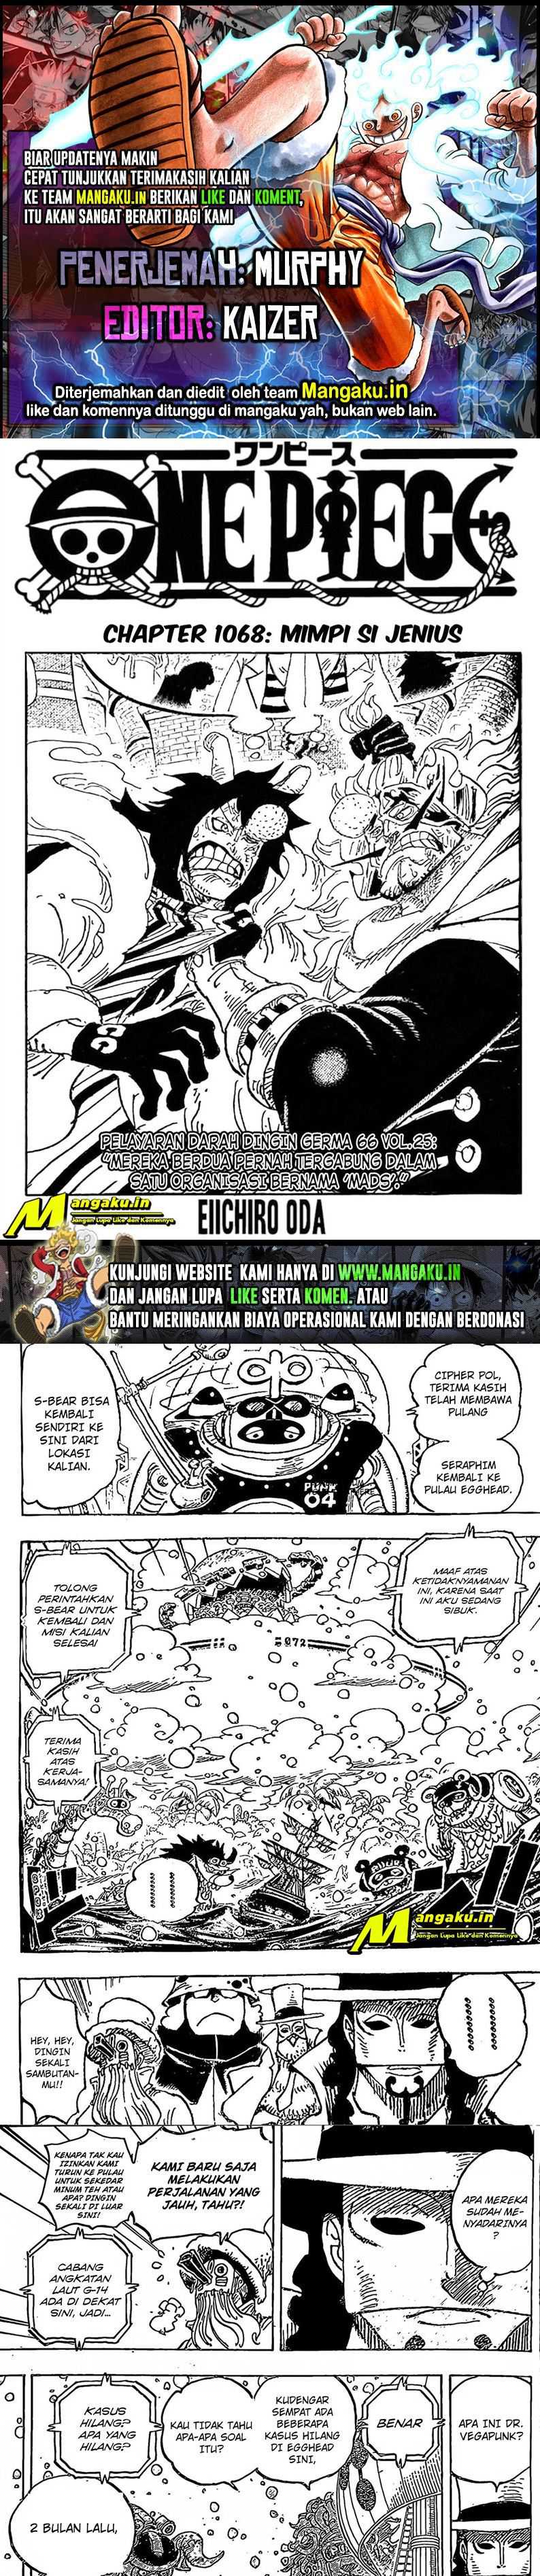 One Piece Chapter 1068